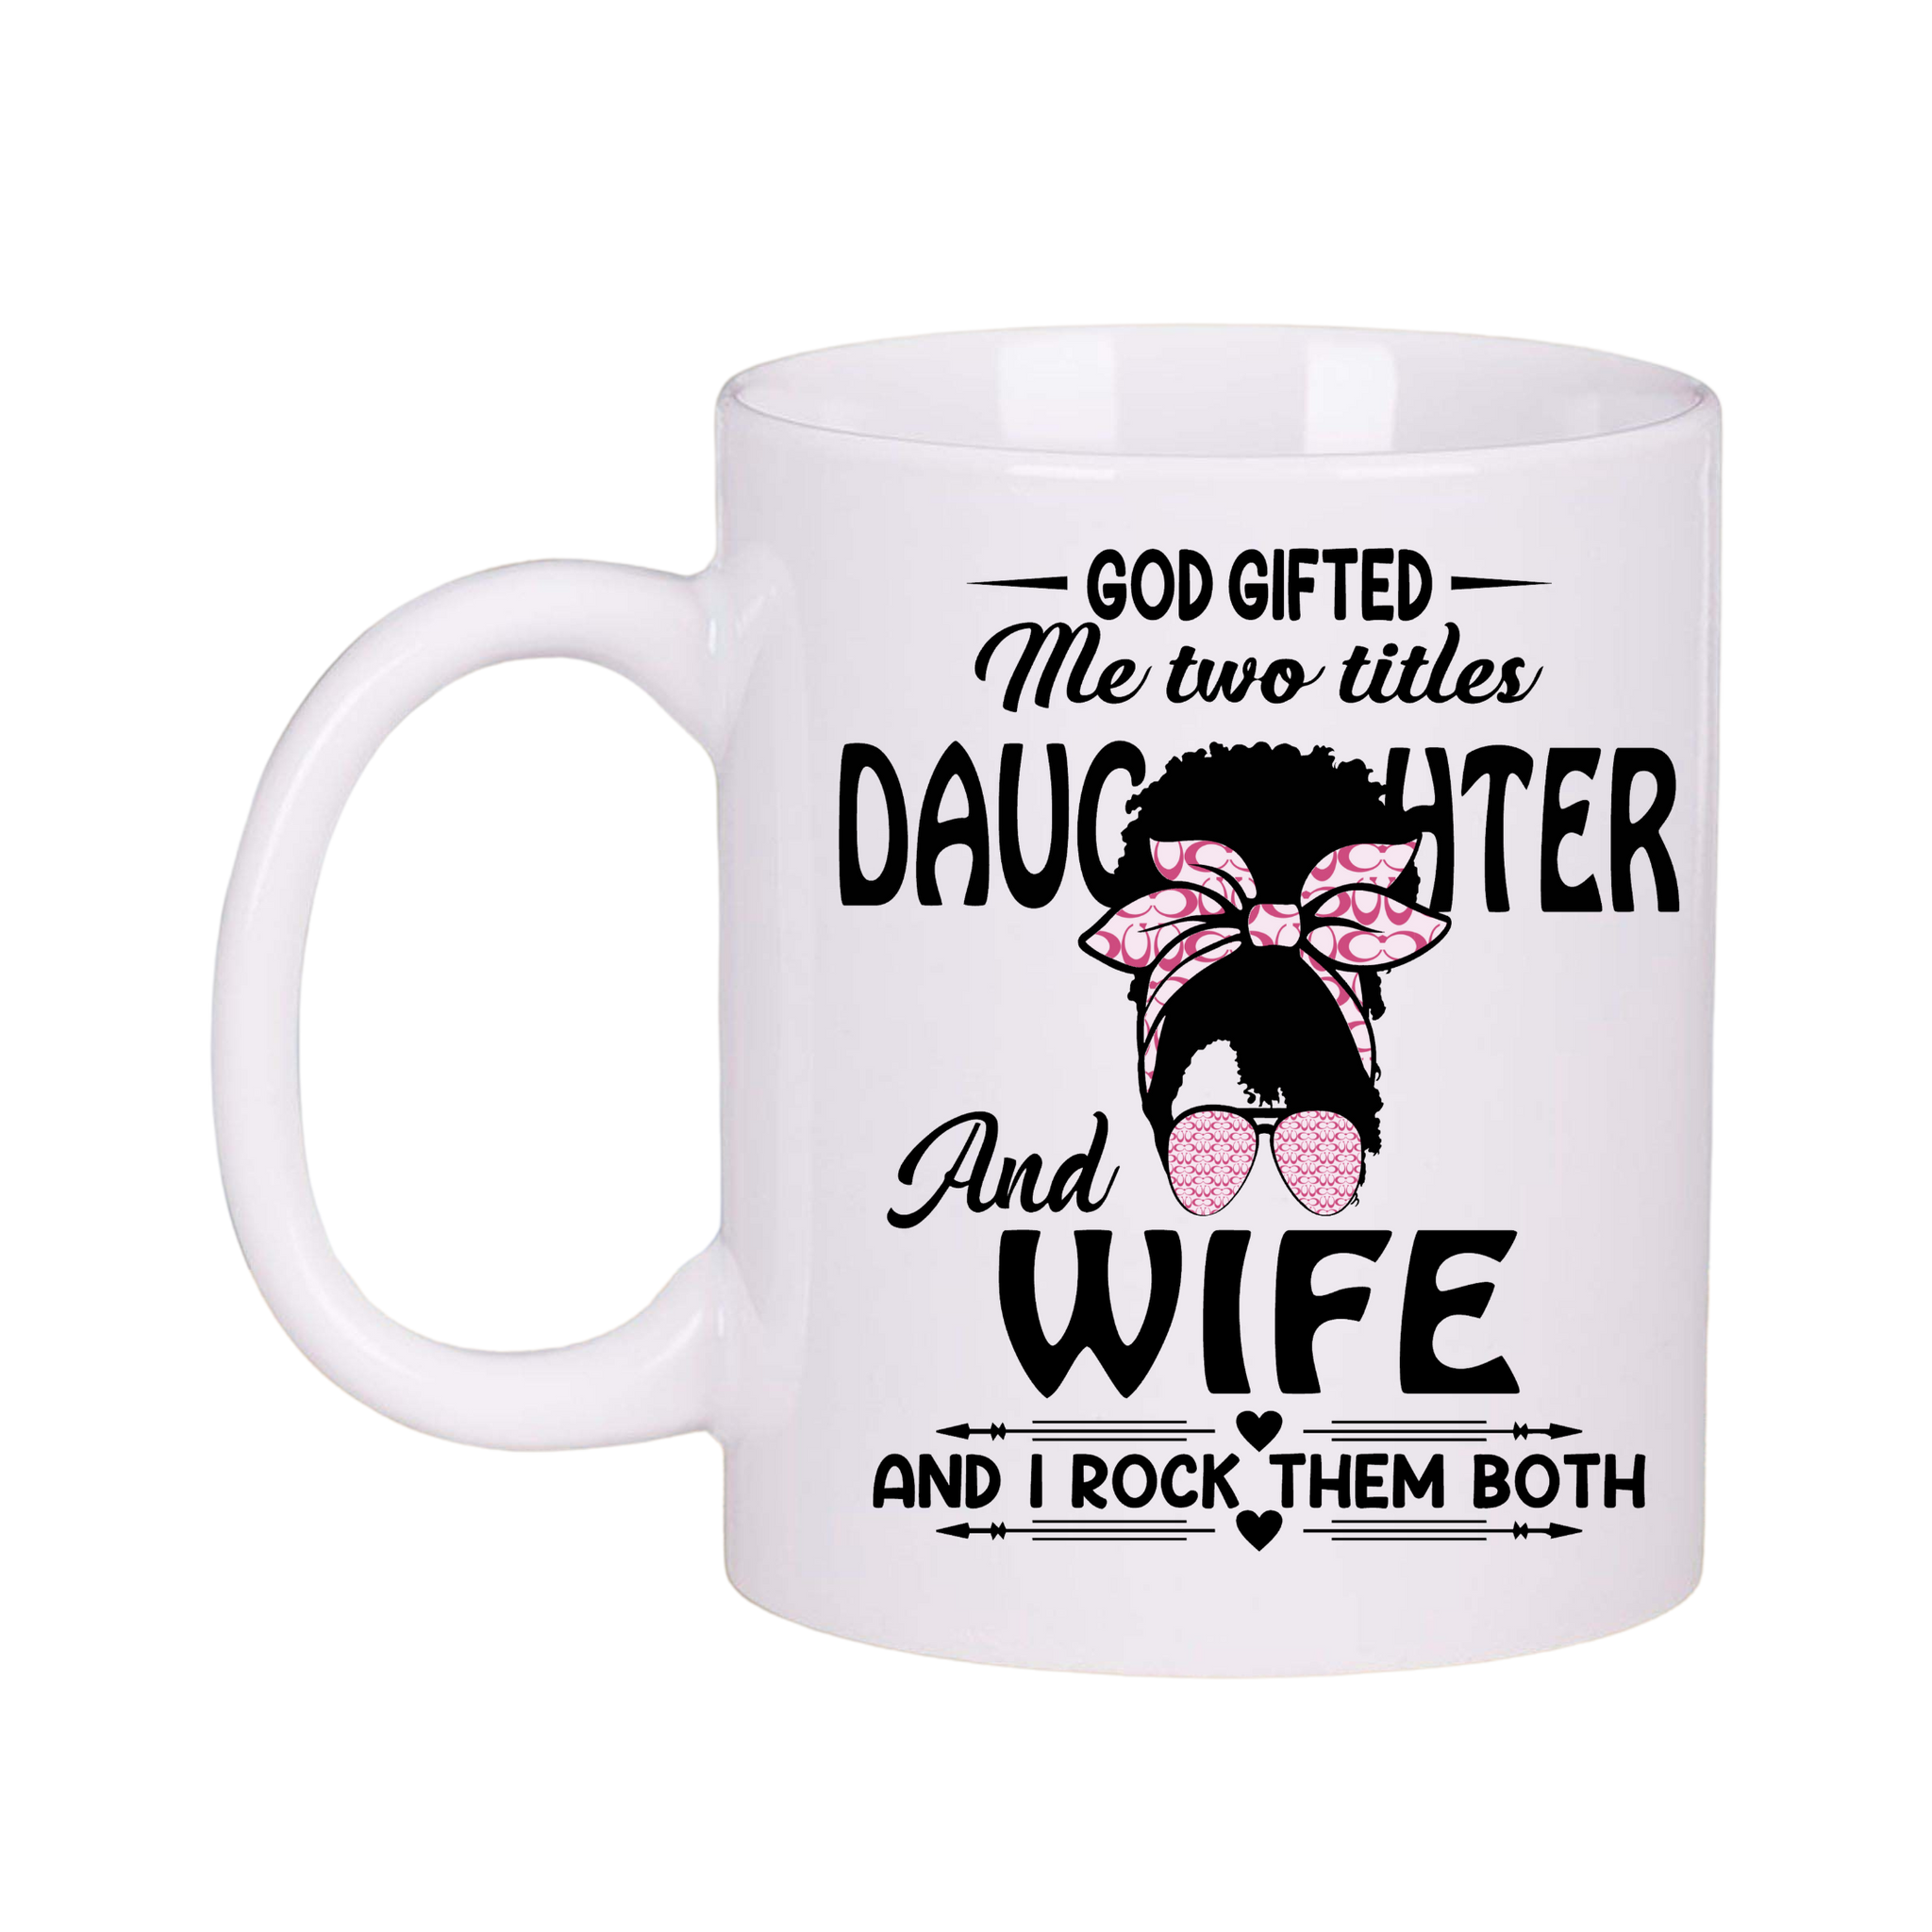 Daughter Wife Birthday Appreciation Coffee Tea Mug Gift Set Gift for Her - Inspire Me Positive